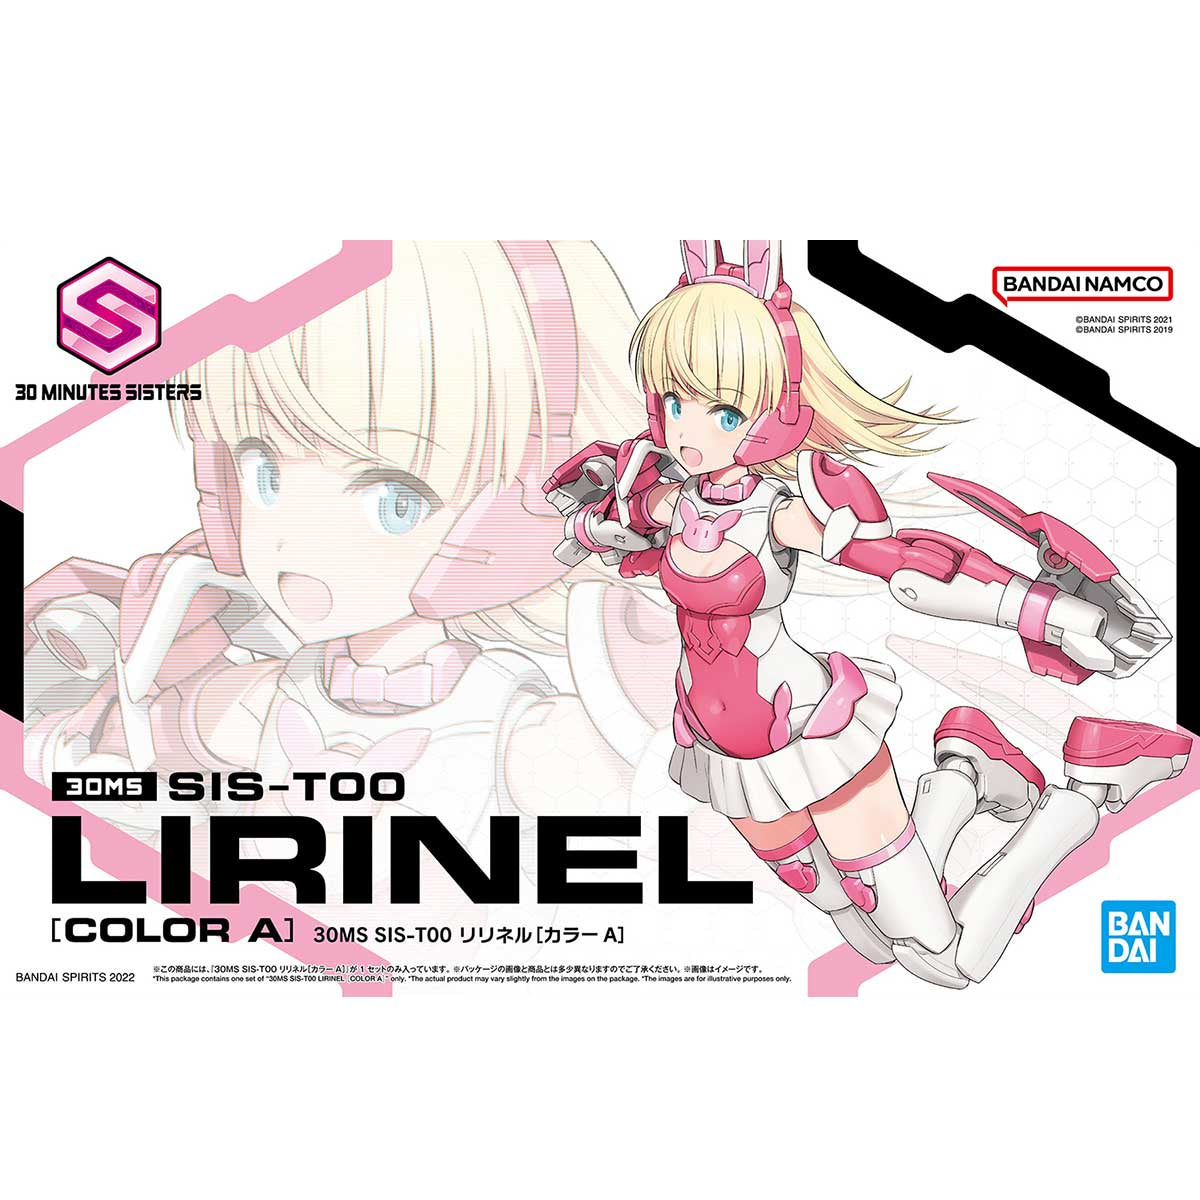 SIS-T00 Lirinel (Color A) 30 Minutes Sisters Model Kit #5063934 by Bandai